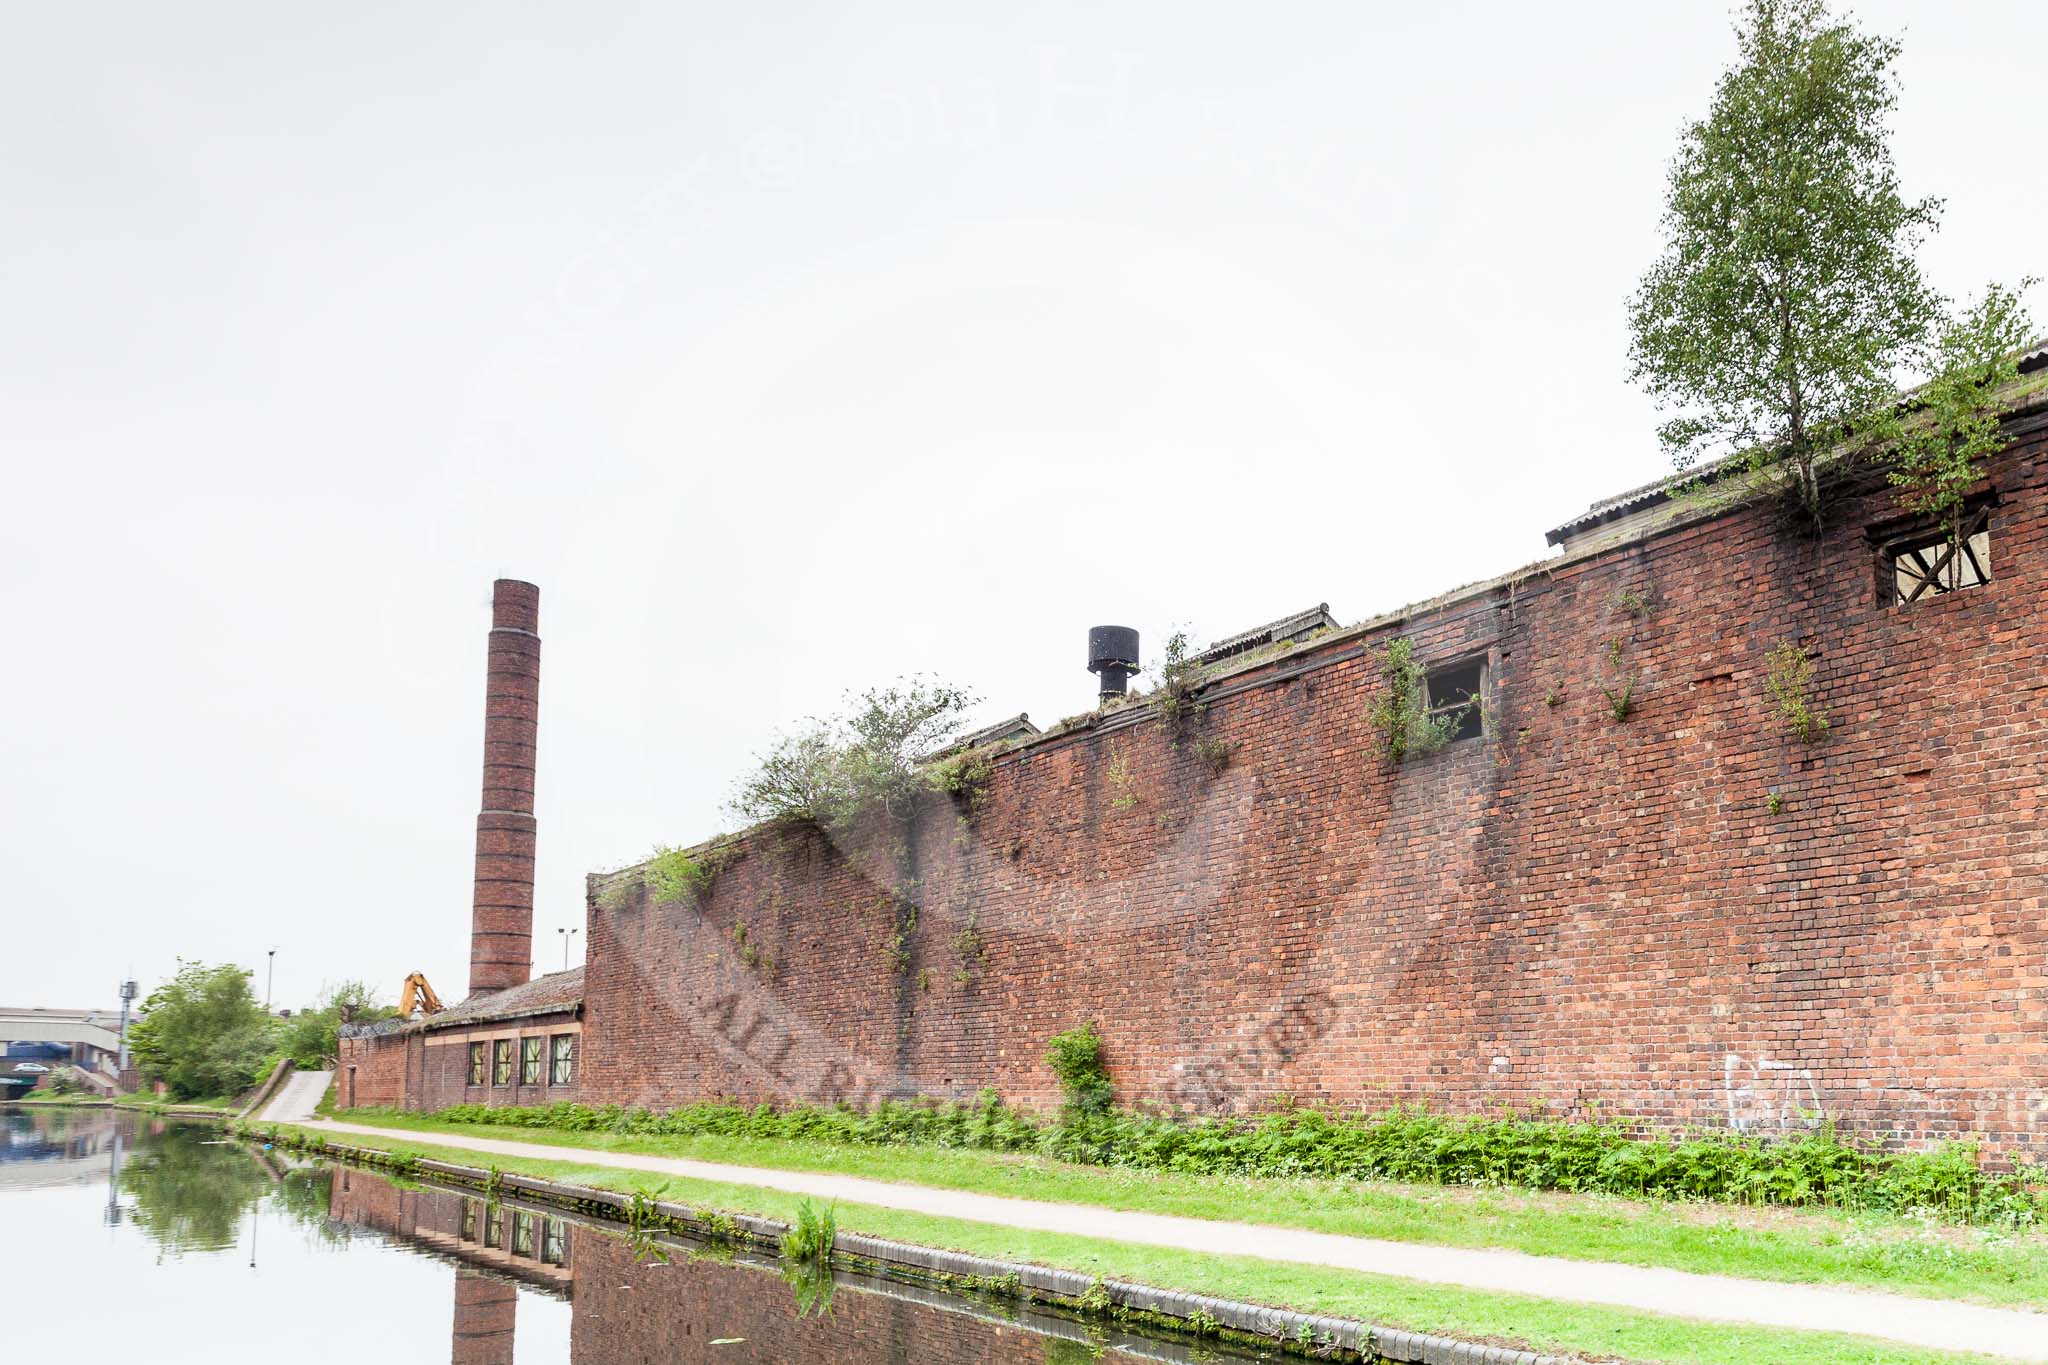 BCN 24h Marathon Challenge 2015: Trees growing out of the wall of an old factory. BCN New Main Line between Avery Rail Bridge and Rabobe Lane Bridge.
Birmingham Canal Navigations,



on 23 May 2015 at 10:00, image #48